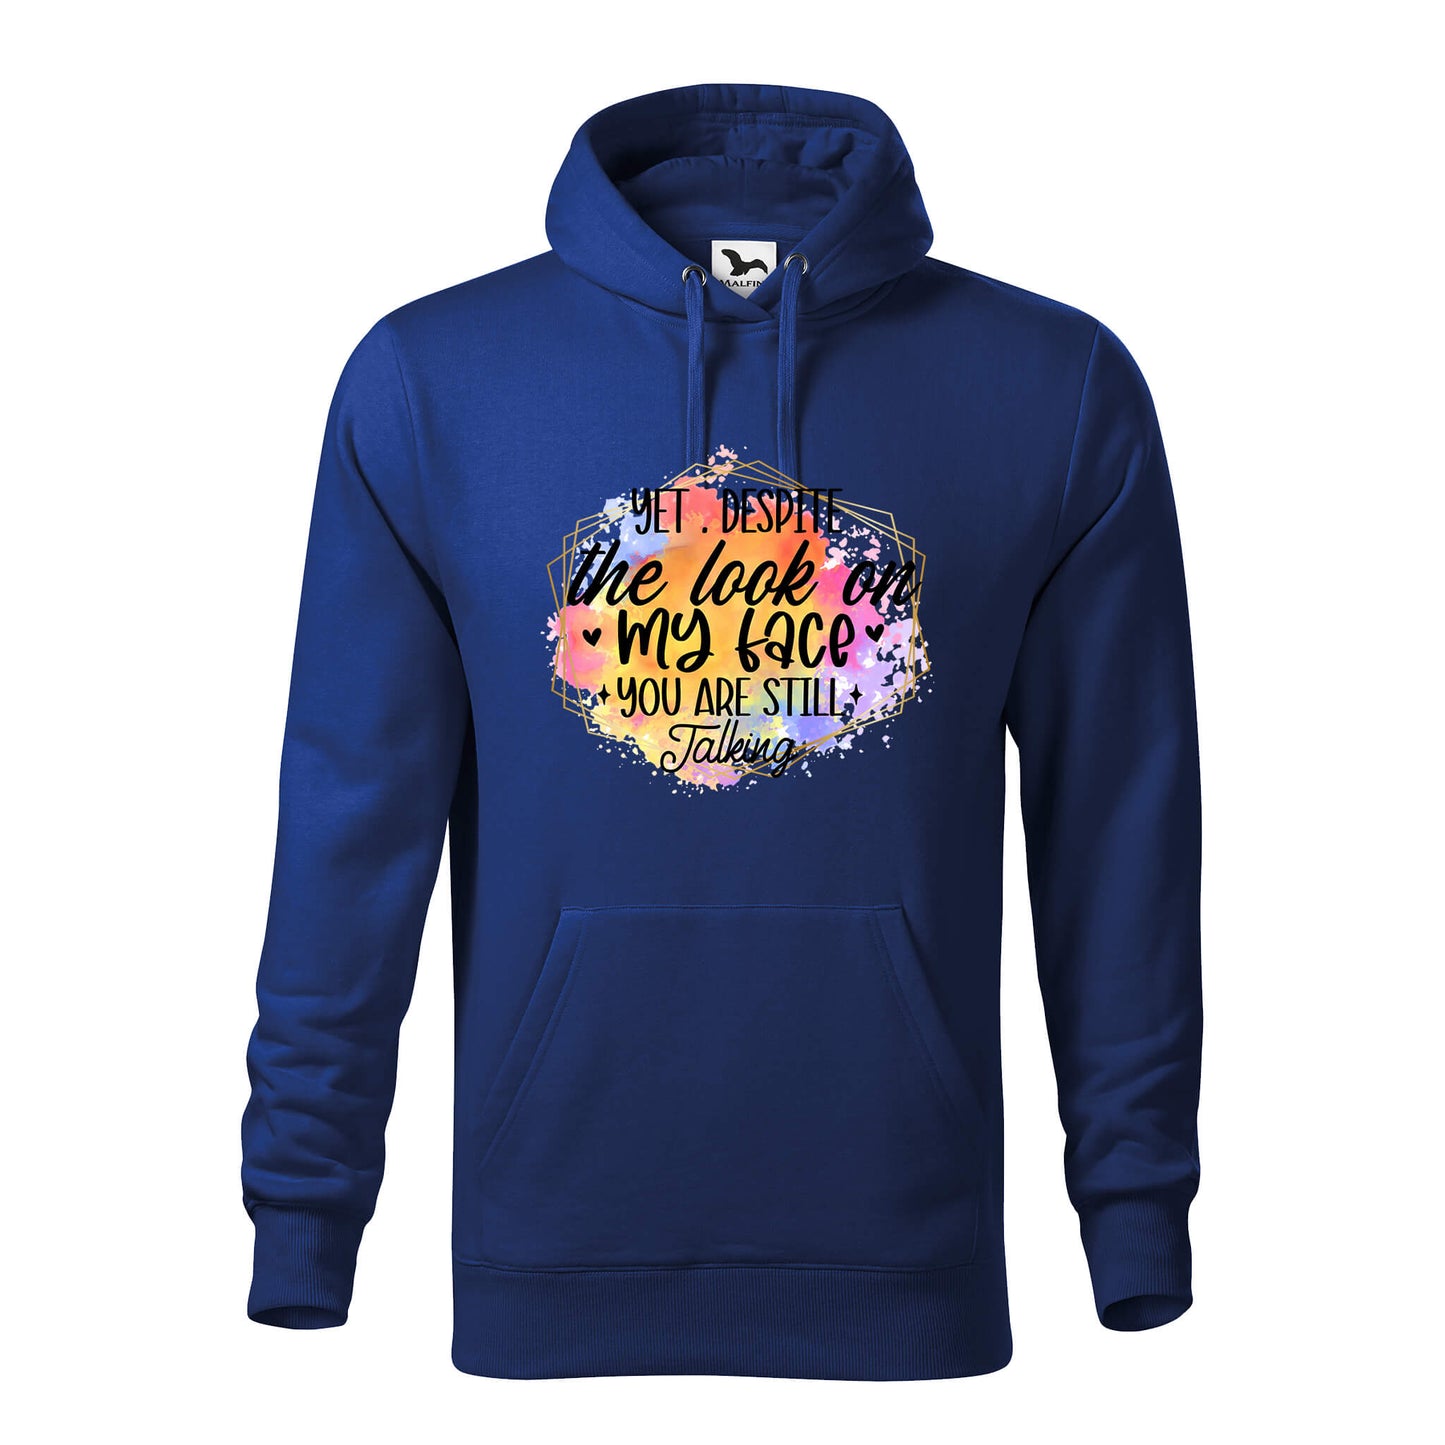 Yet despite the look on my face hoodie - rvdesignprint